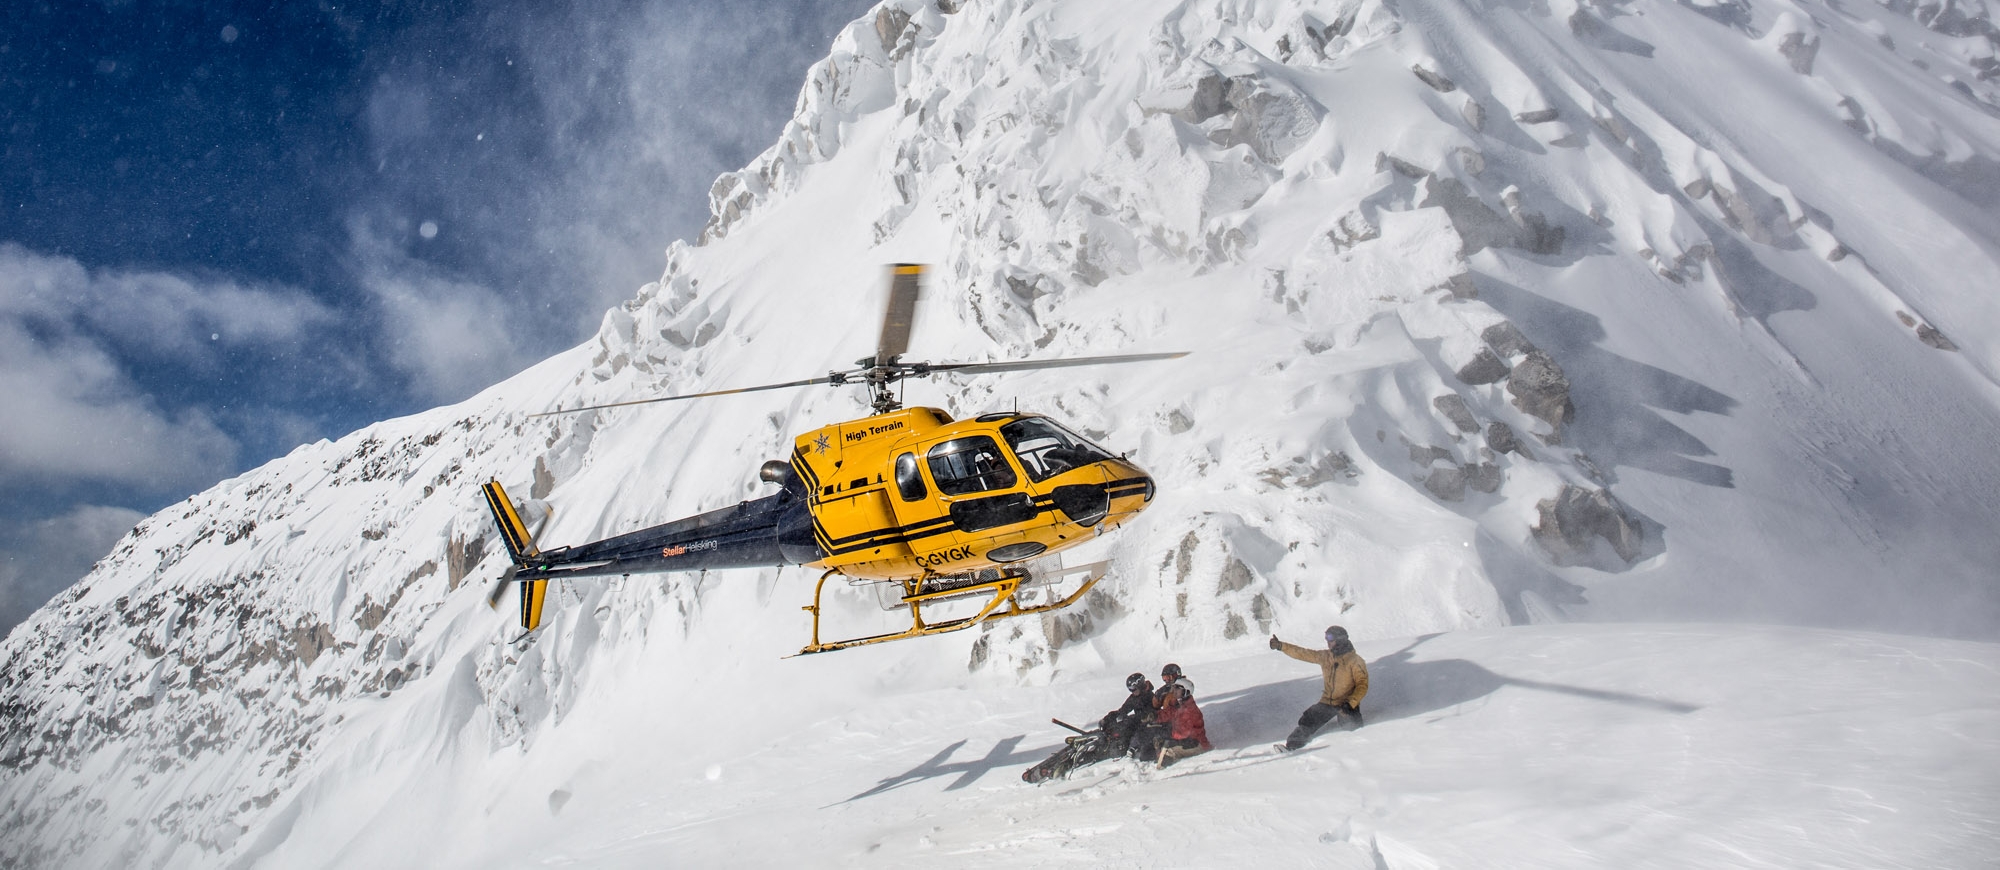 Enjoy BC cat skiing and bc heli skiing in our region